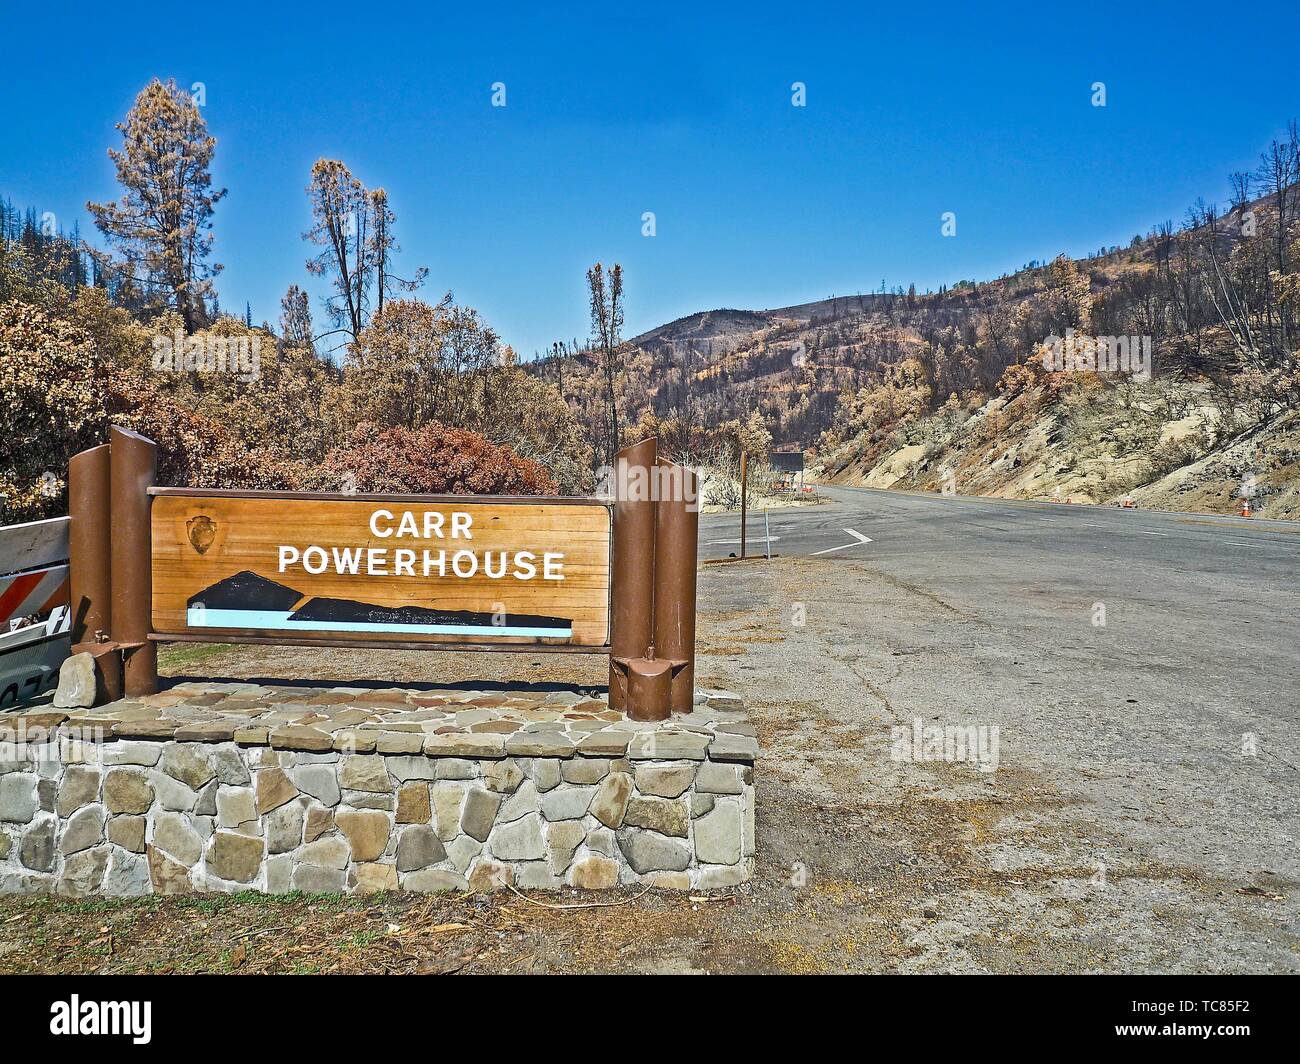 Carr Powerhouse sign near the origin of the Carr Fire in northern California in 2018. The fire was started in July 2018 by a disabled vehicle near Stock Photo